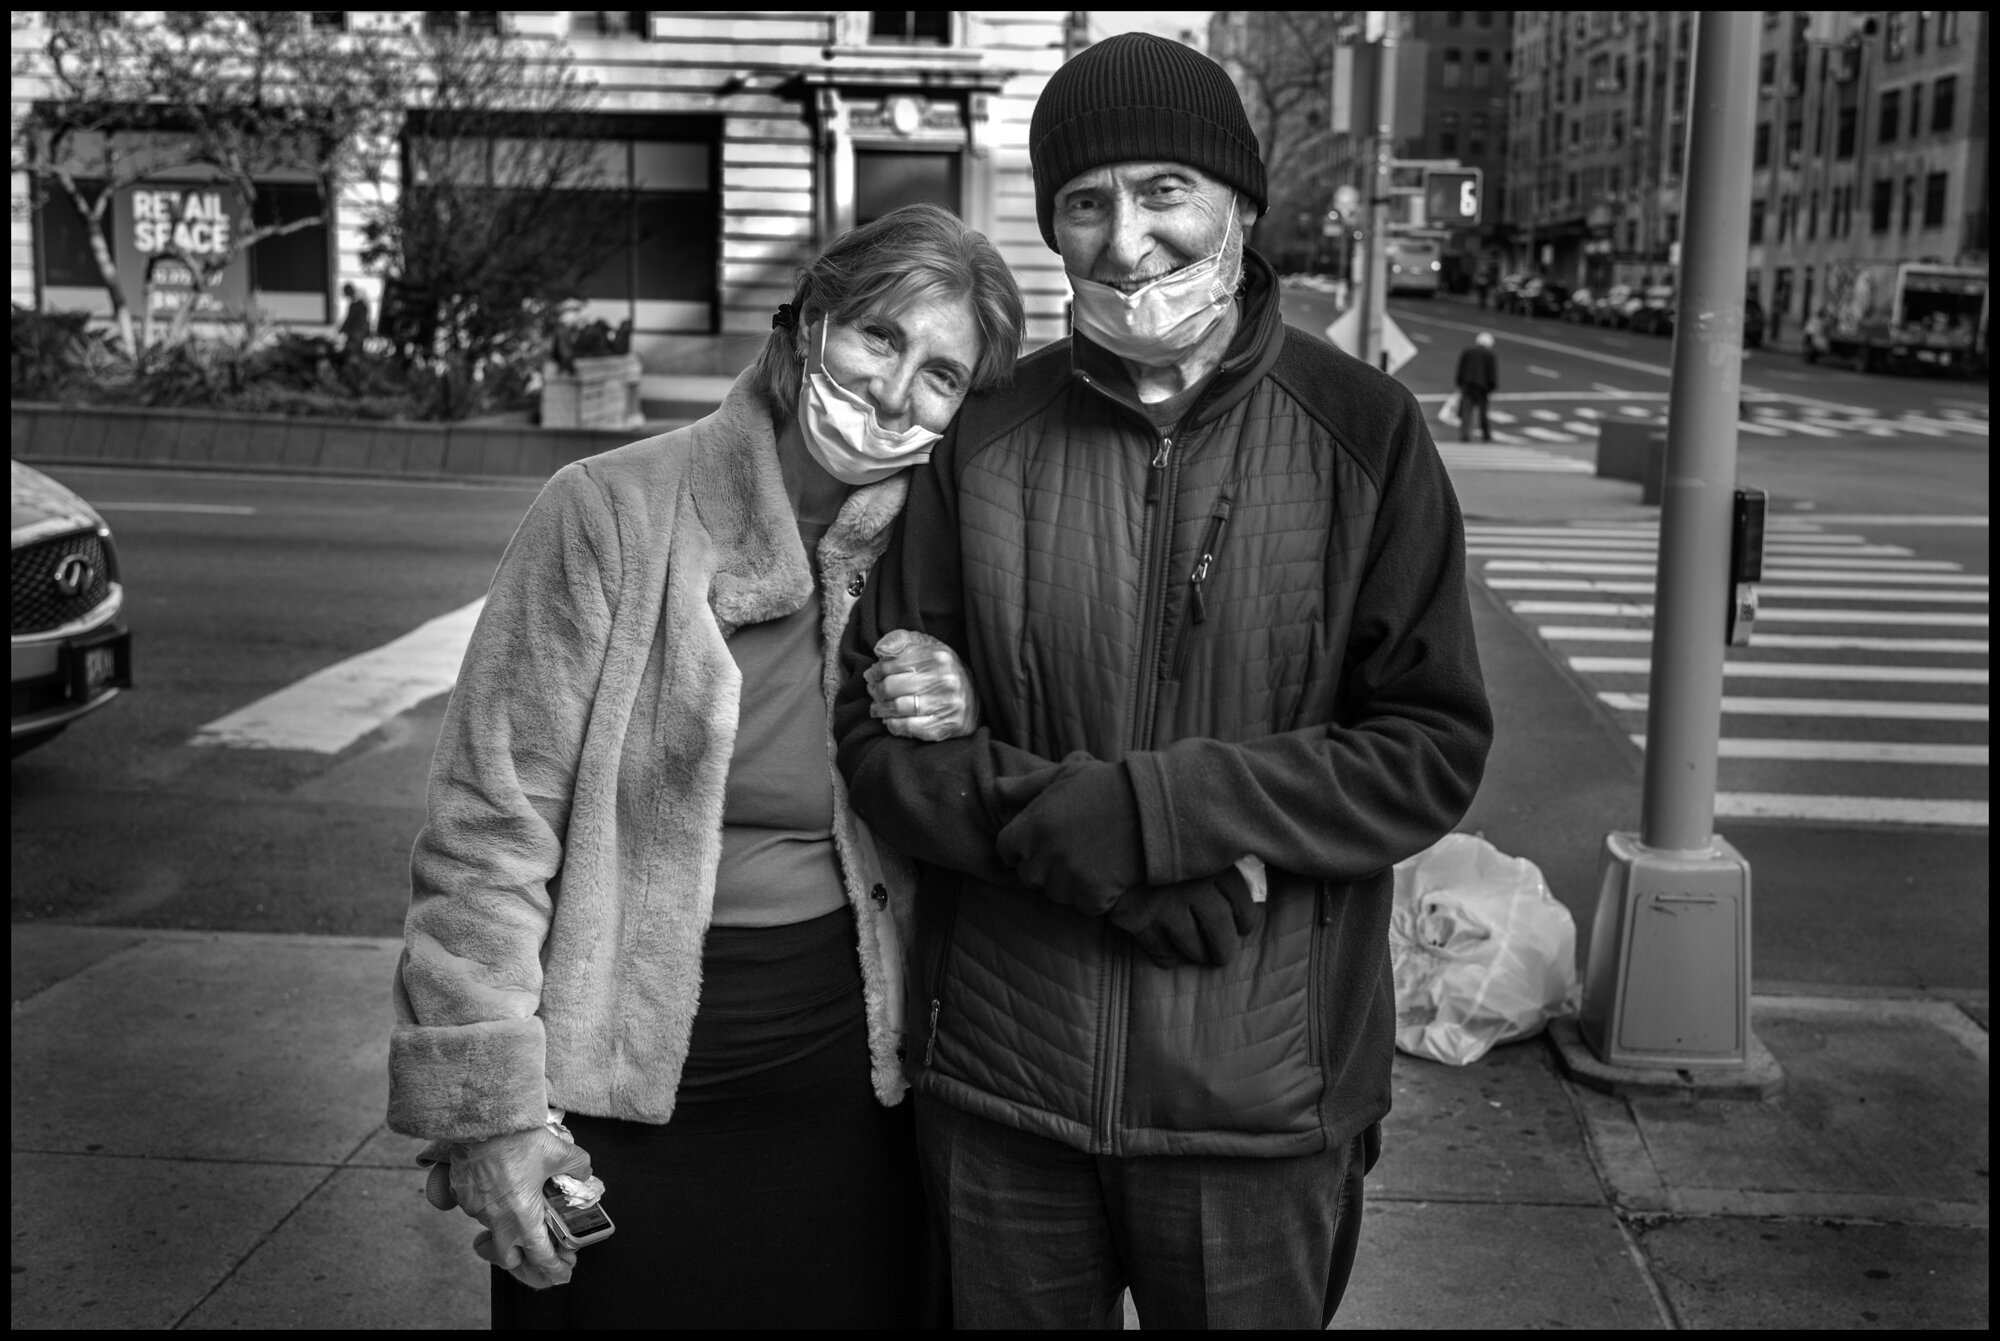  As I crossed a street corner, near Broadway and 85th street, I saw a couple walking both hand in hand. There was something about the way they walked together that felt very happy, and while they were both wearing masks-there was a lift to their step